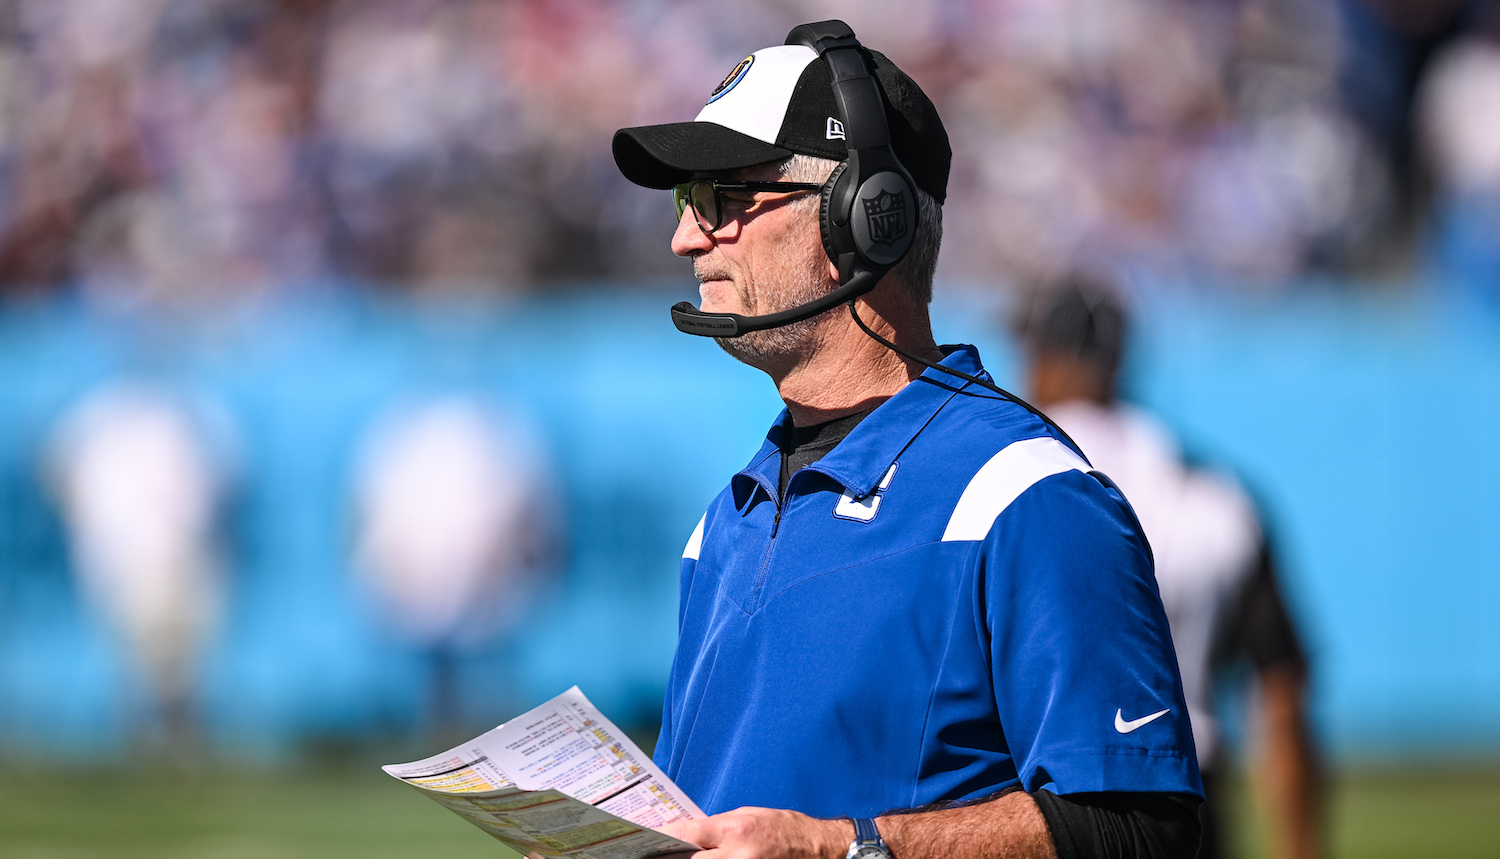 NASHVILLE, TN - OCTOBER 23: Indianapolis Colts head coach Frank Reich coaches during the Tennessee Titans game versus the Indianapolis Colts on October 23, 2022, at Nissan Stadium in Nashville, TN. (Photo by Bryan Lynn/Icon Sportswire)